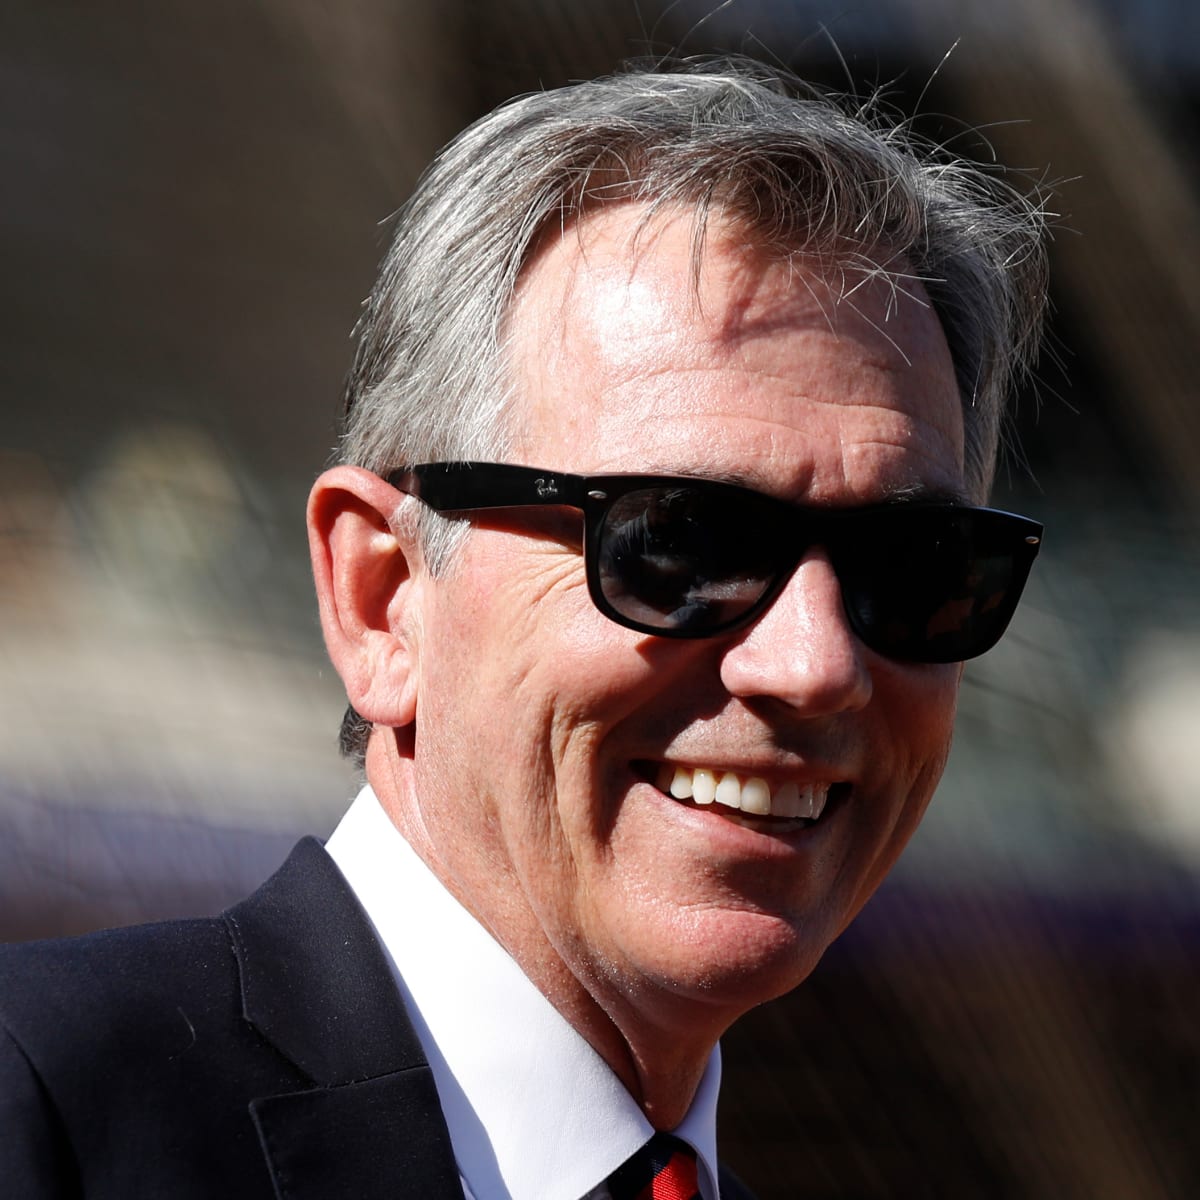 Oakland A's promote Billy Beane to Exec. VP of Baseball Ops